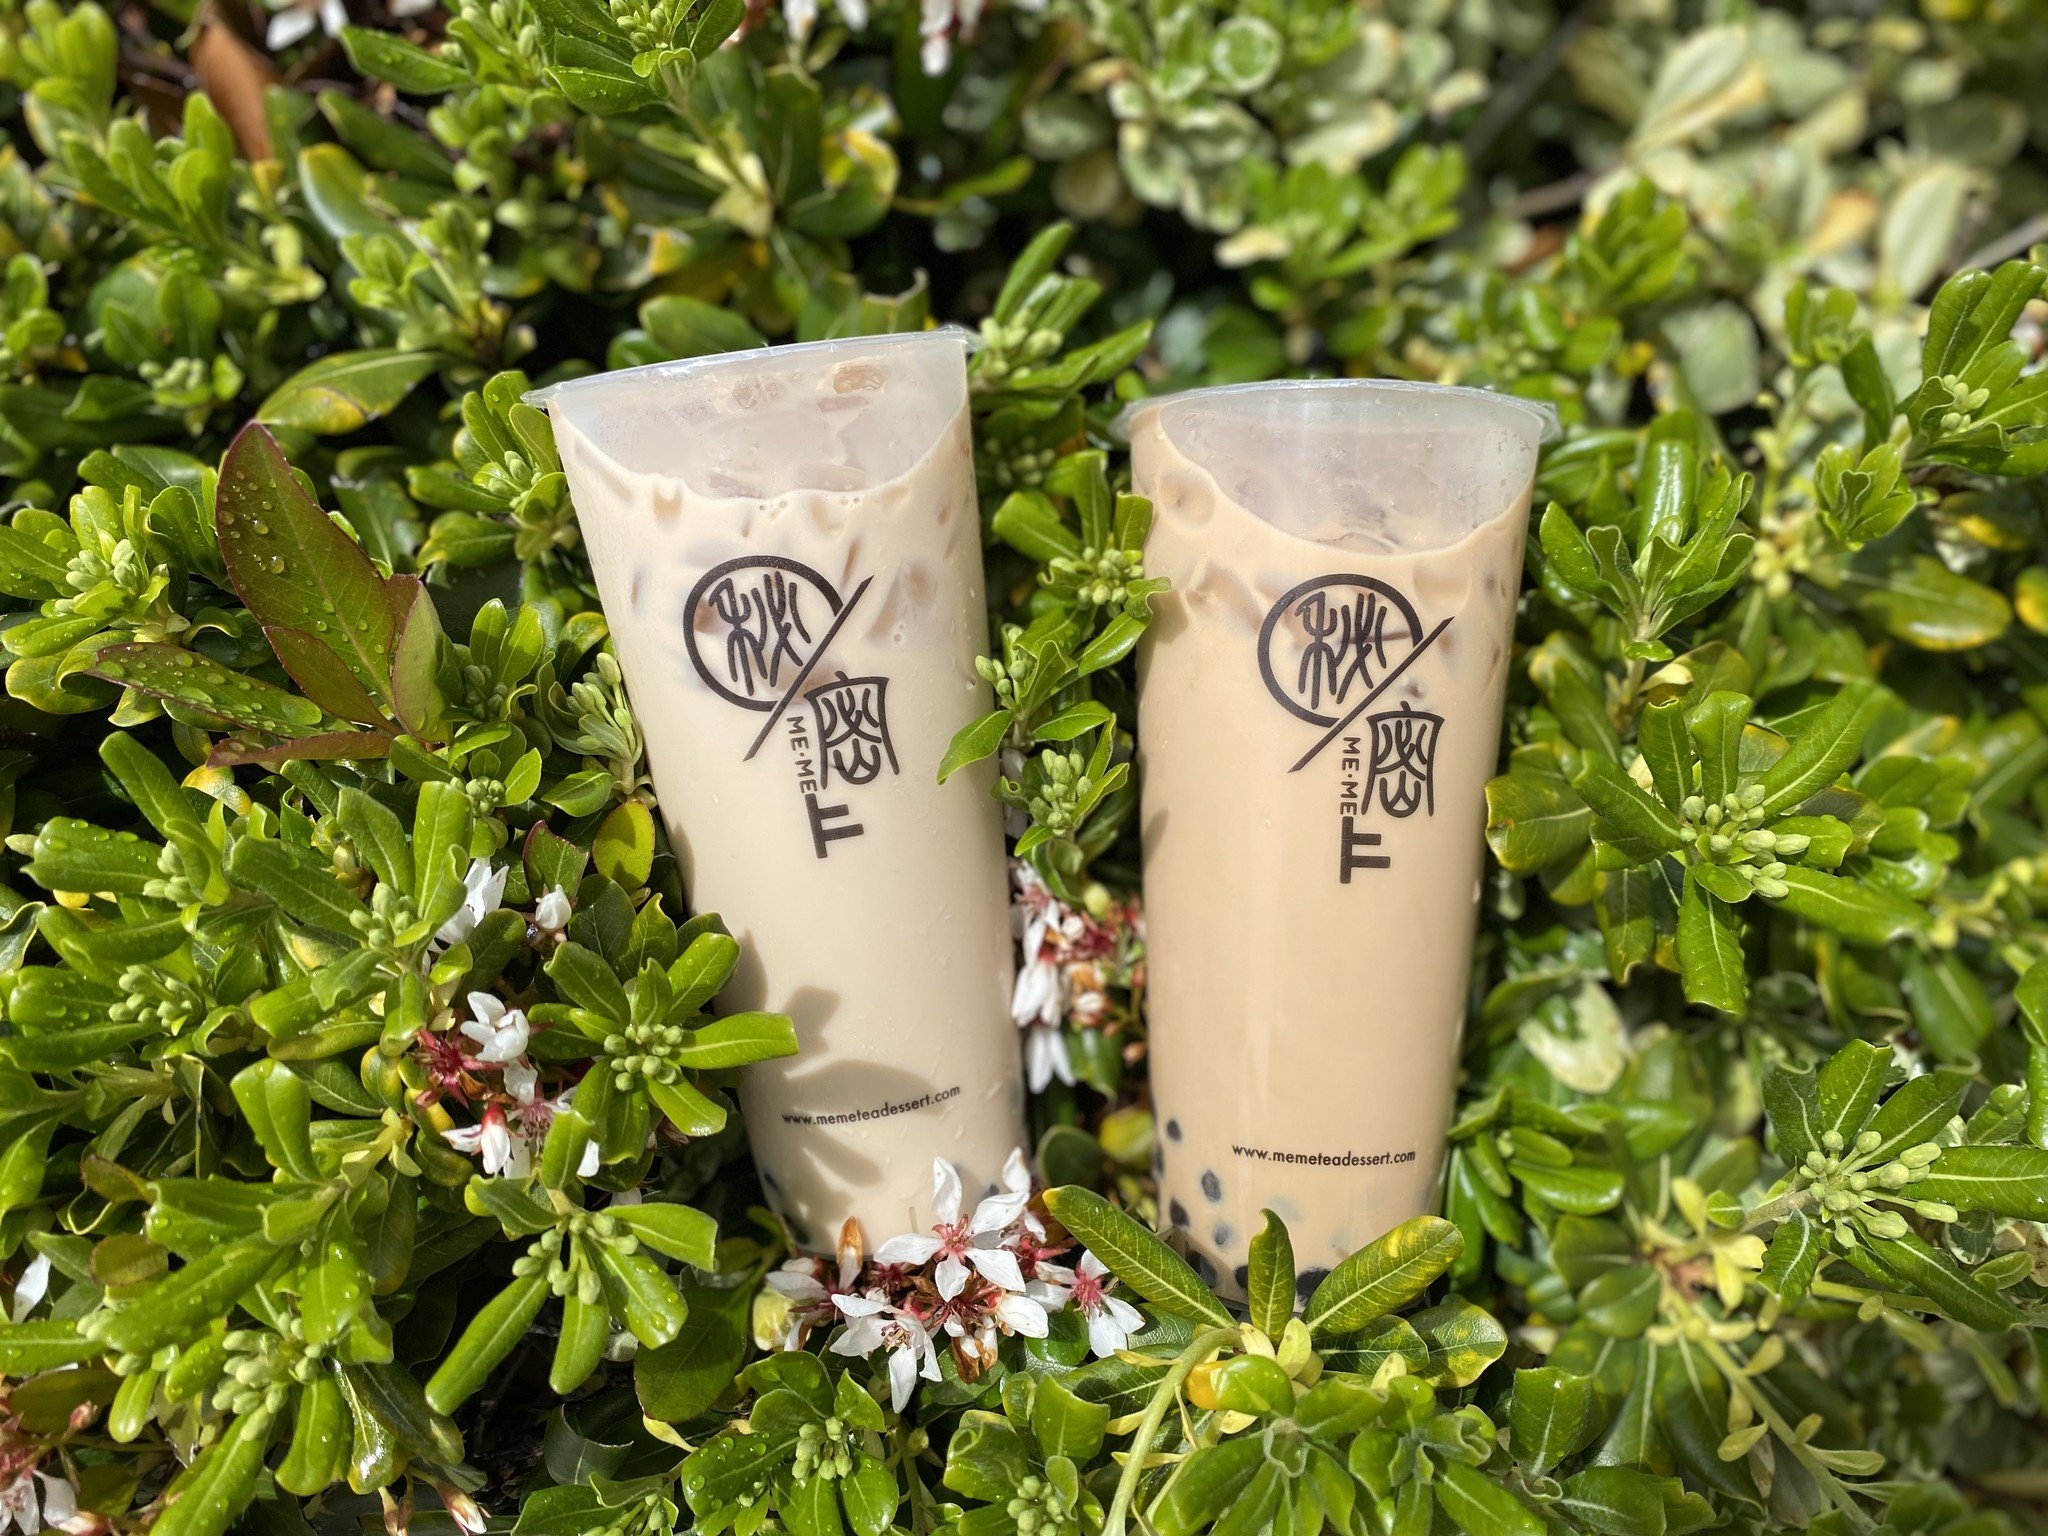 𝙷𝚊𝚙𝚙𝚢 𝙴𝚊𝚛𝚝𝚑 𝙳𝚊𝚢🌎

(Pictured: Longan Honey Jasmine Milk Tea &amp; Okinawa Milk Tea)

‼️OPEN DAILY AT 8:30AM!⏰ Closed Tuesdays
🔑Happiness starts with Me&middot;Me
📱Link in bio to order online!

#SupportLocal #supportlocalsandiego #famil